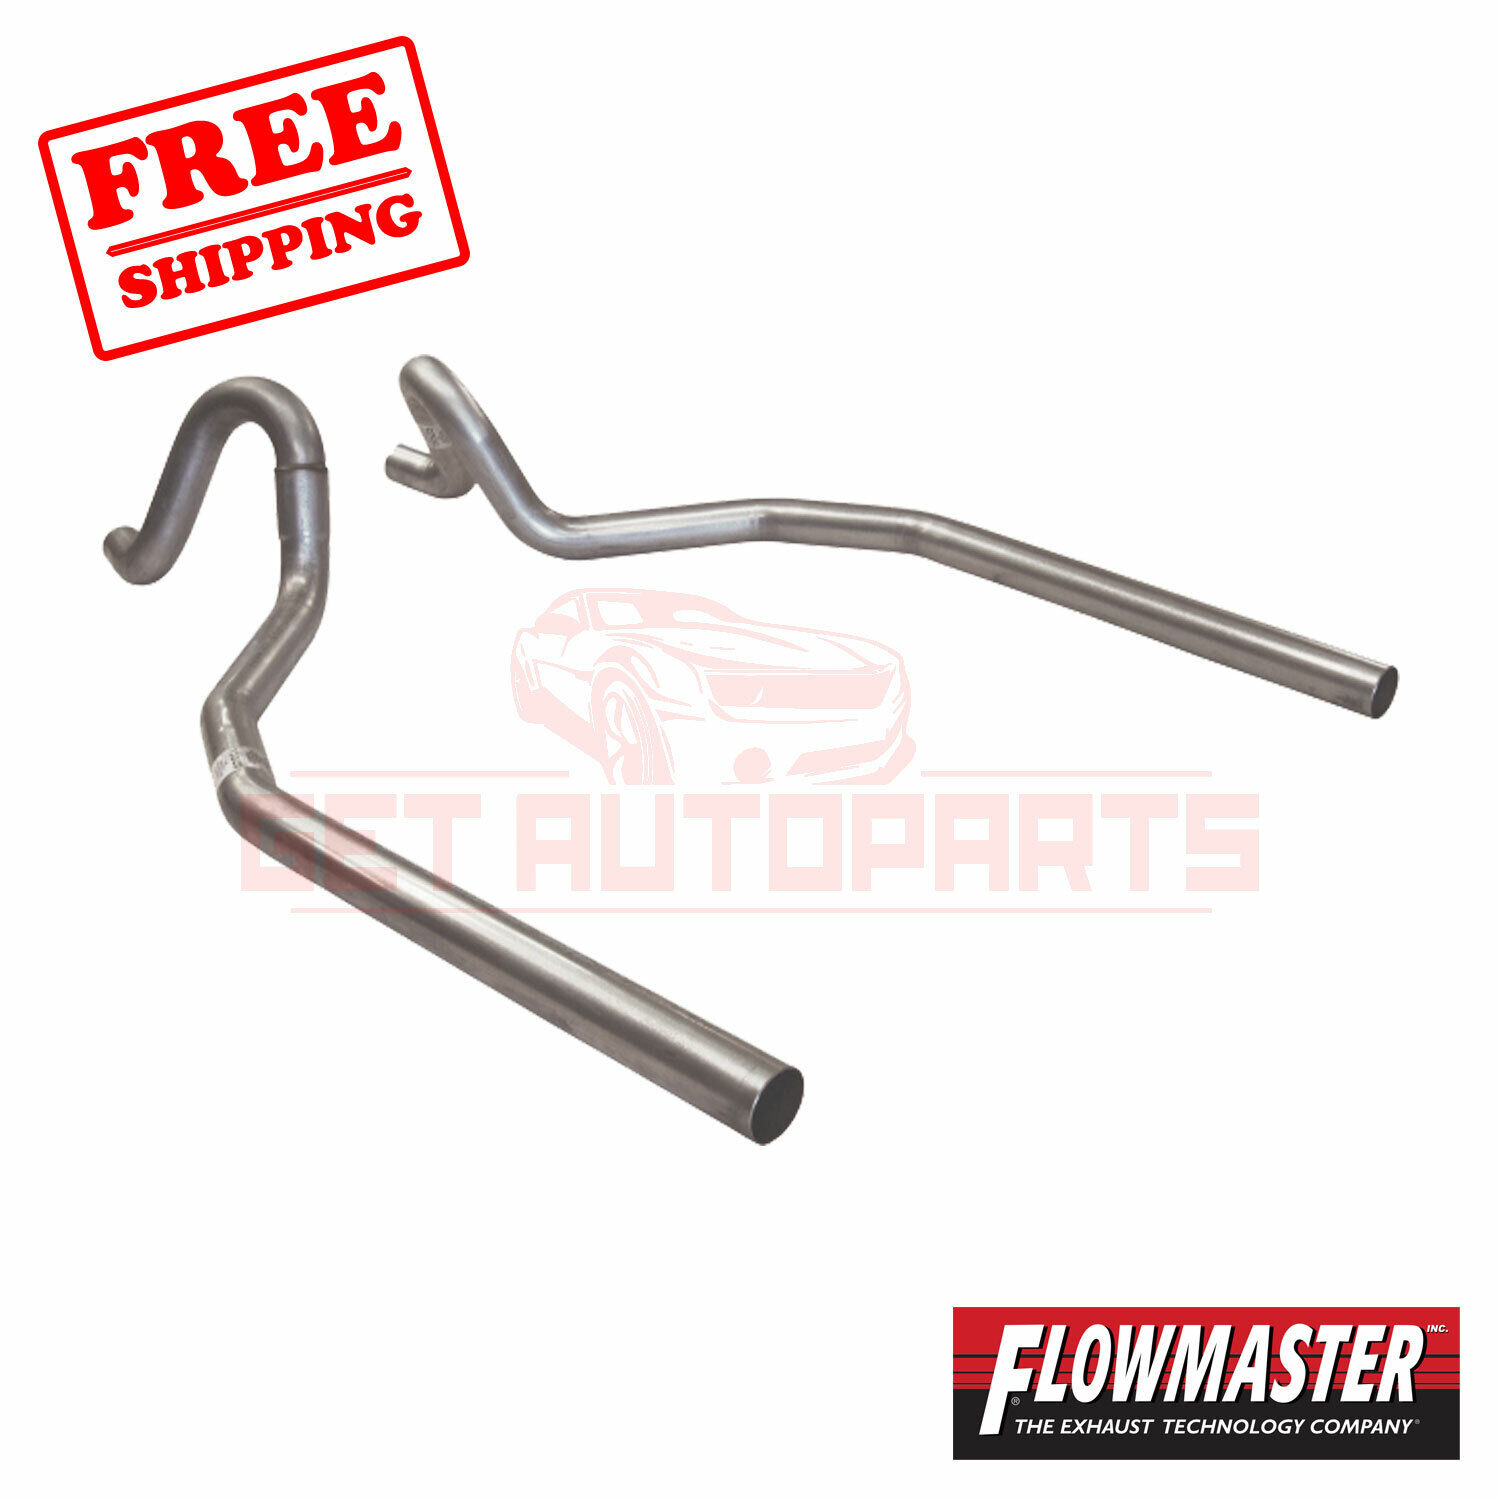 FlowMaster Exhaust Tail Pipe for Chevrolet El Camino 1978-1987